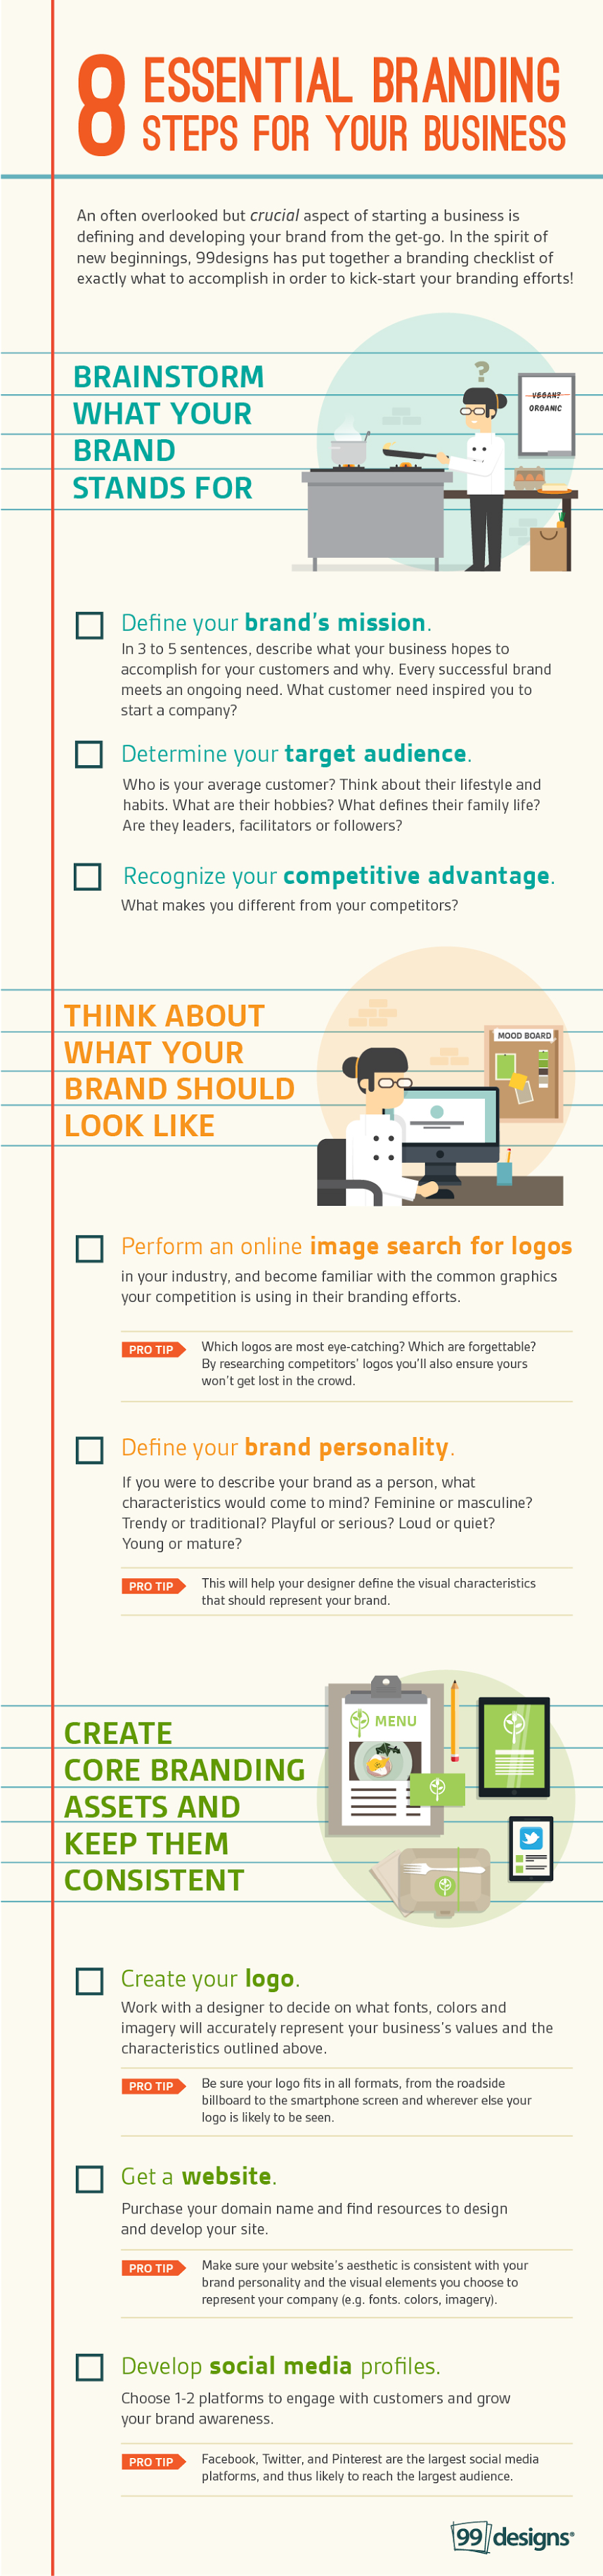 8 Essential Branding Steps For Your Business - #infographic